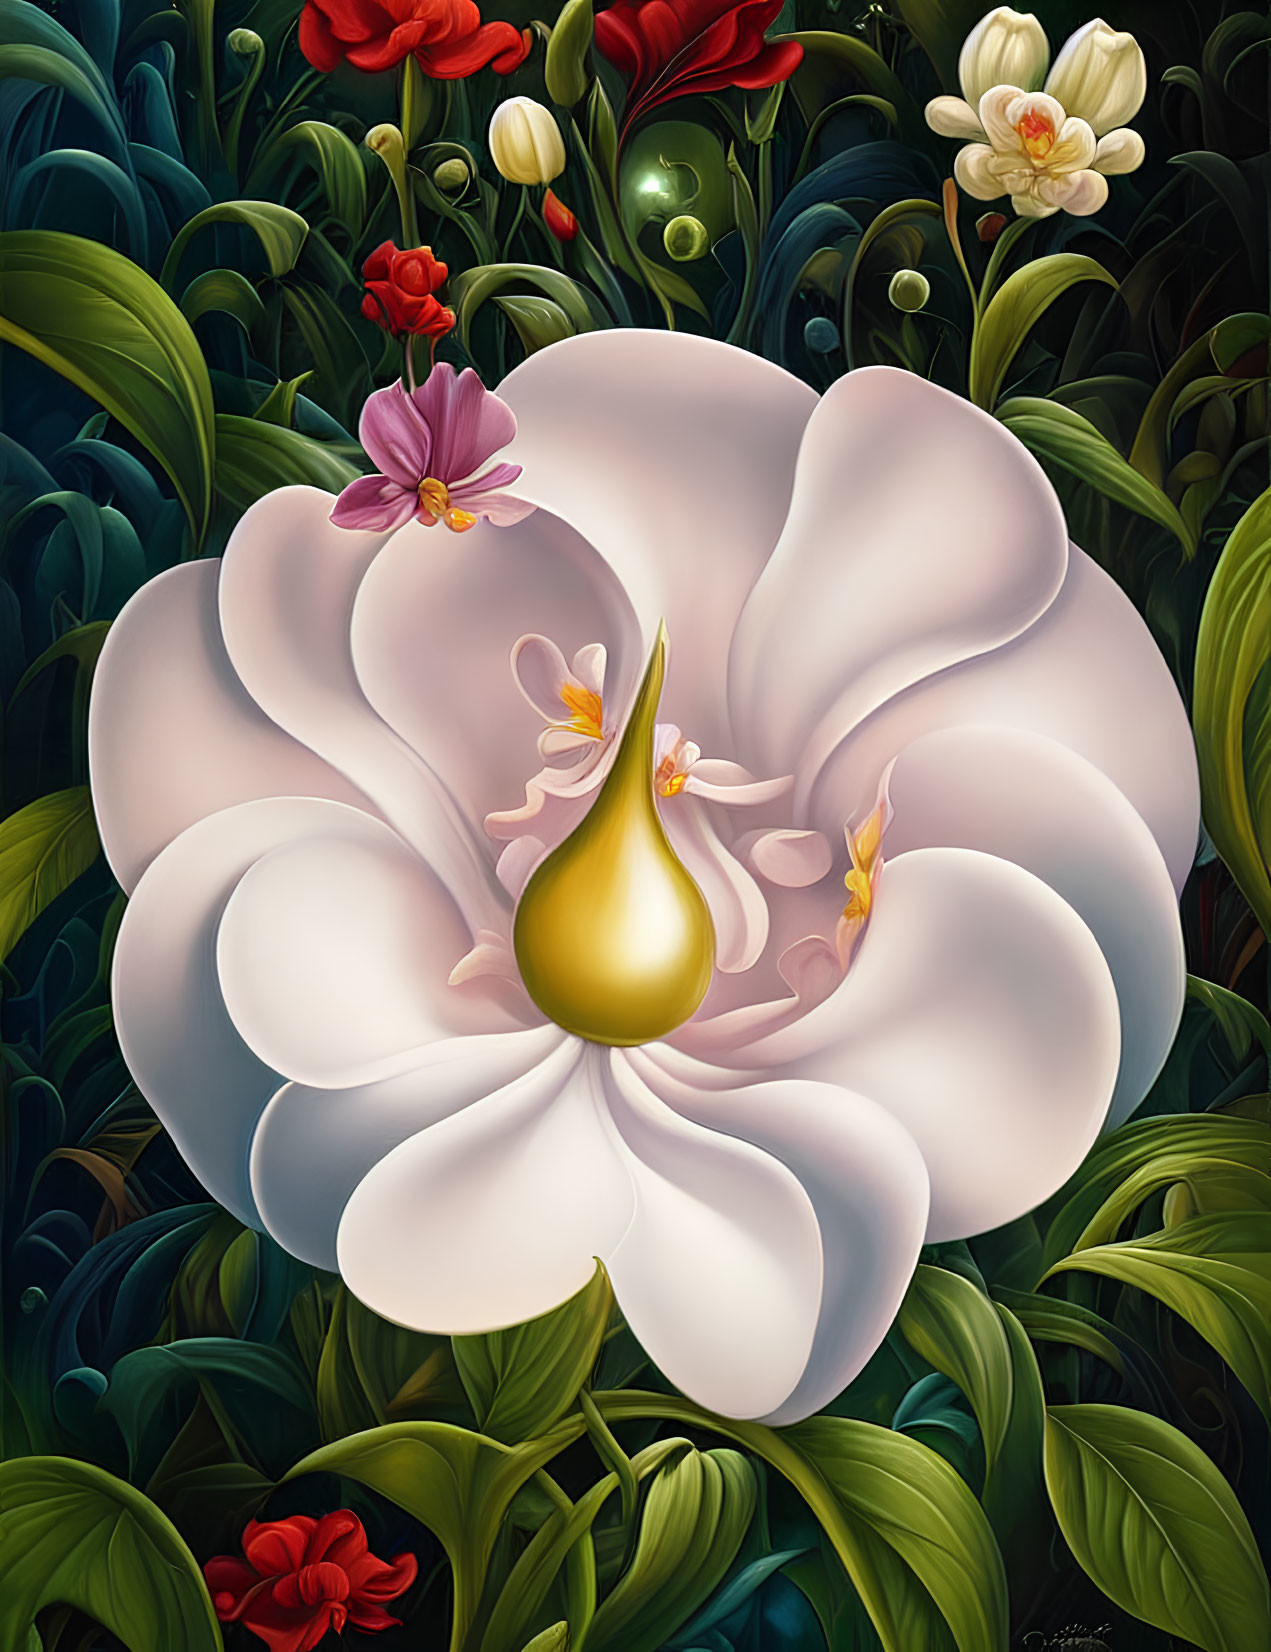 Colorful Surrealist Painting of Large White Flower with Golden Center